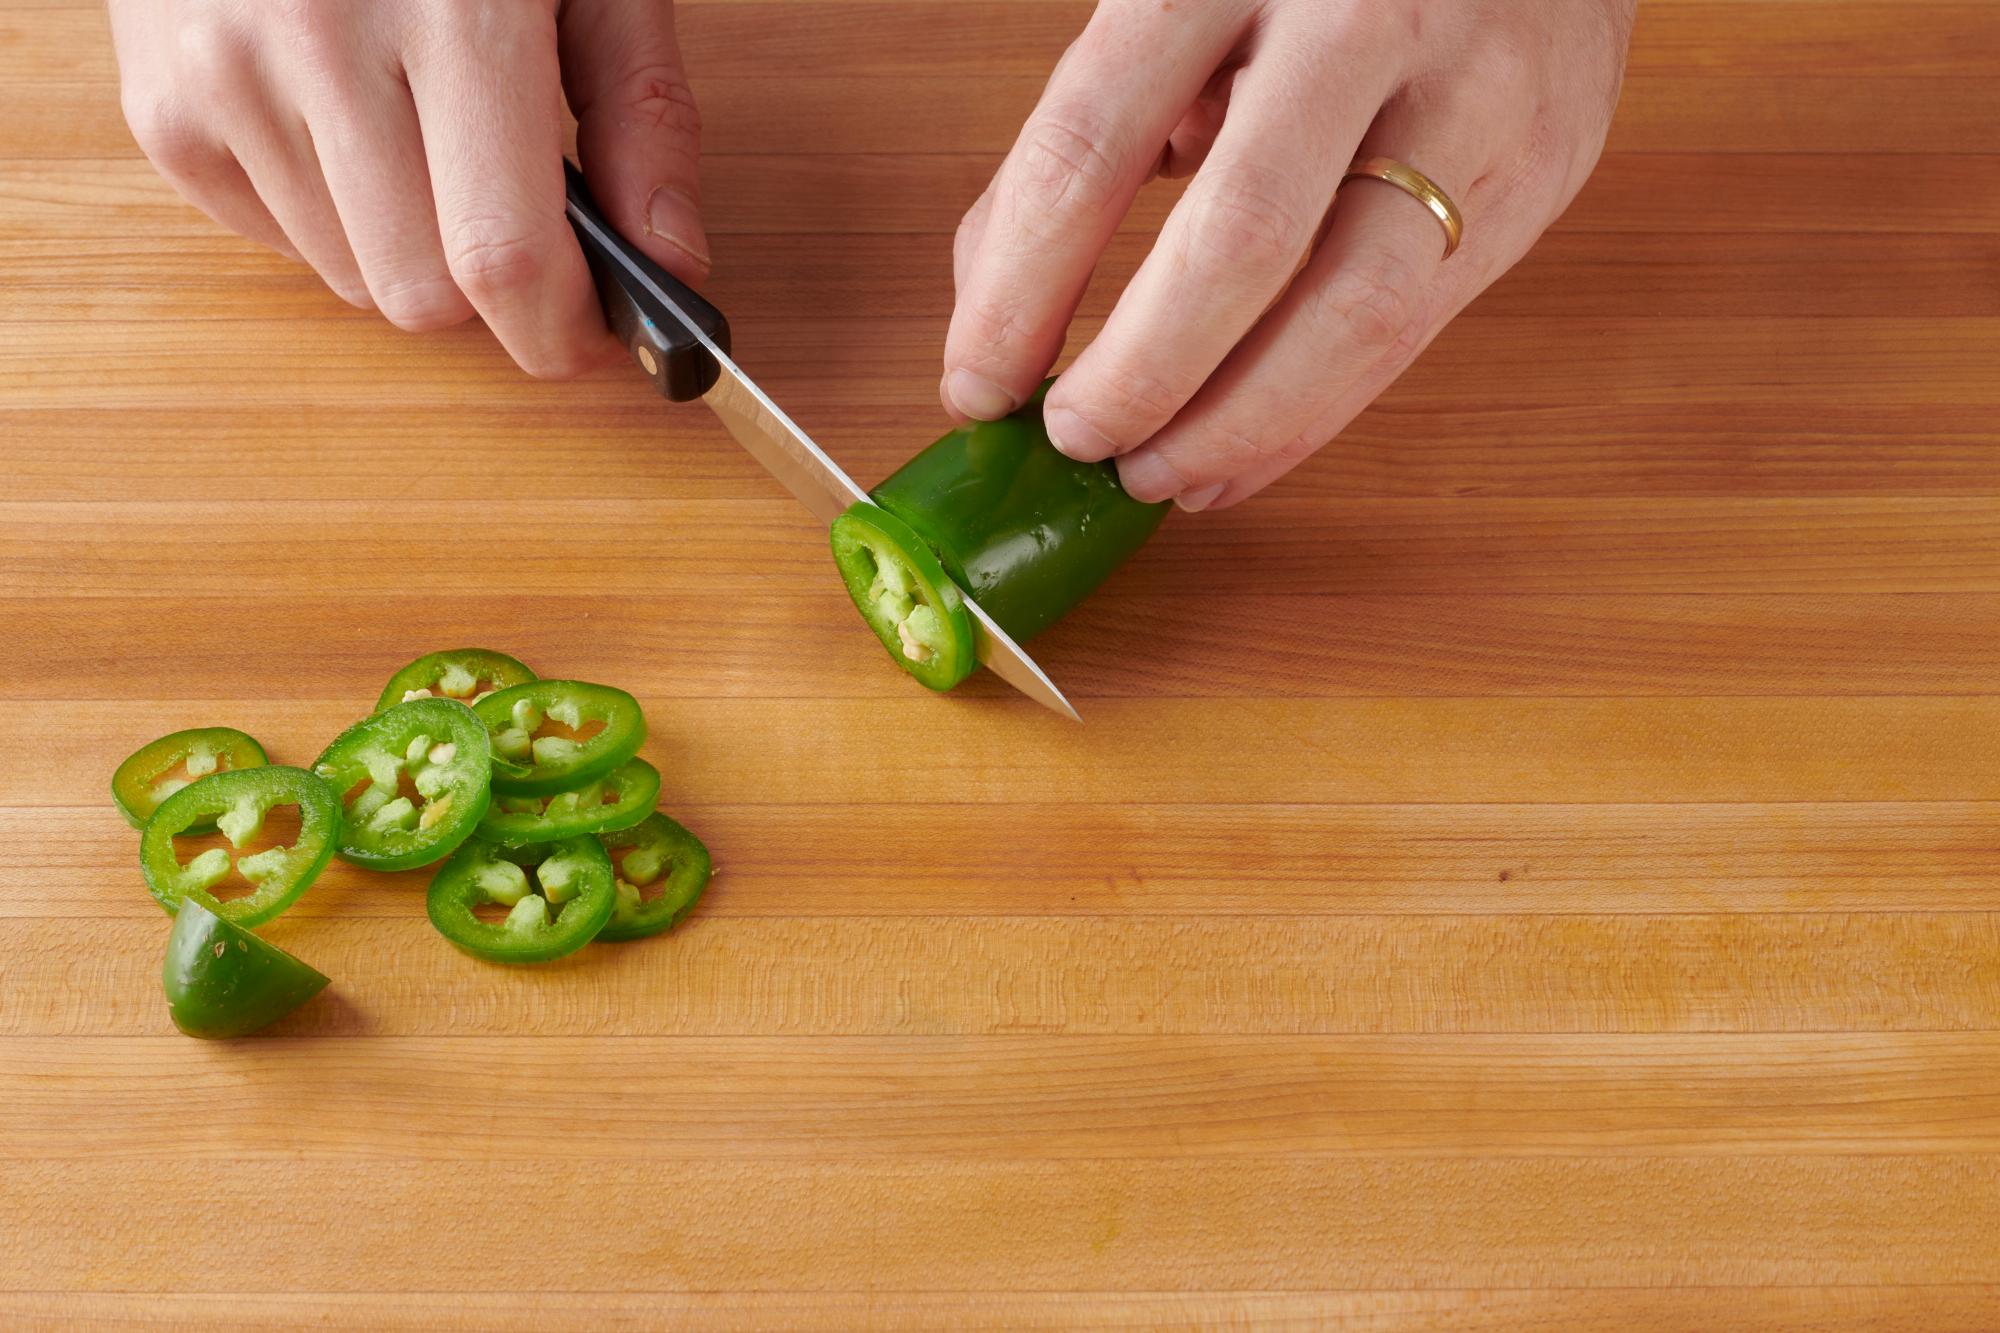 Slicing jalapeno with a 4 Inch Gourmet Paring Knife.